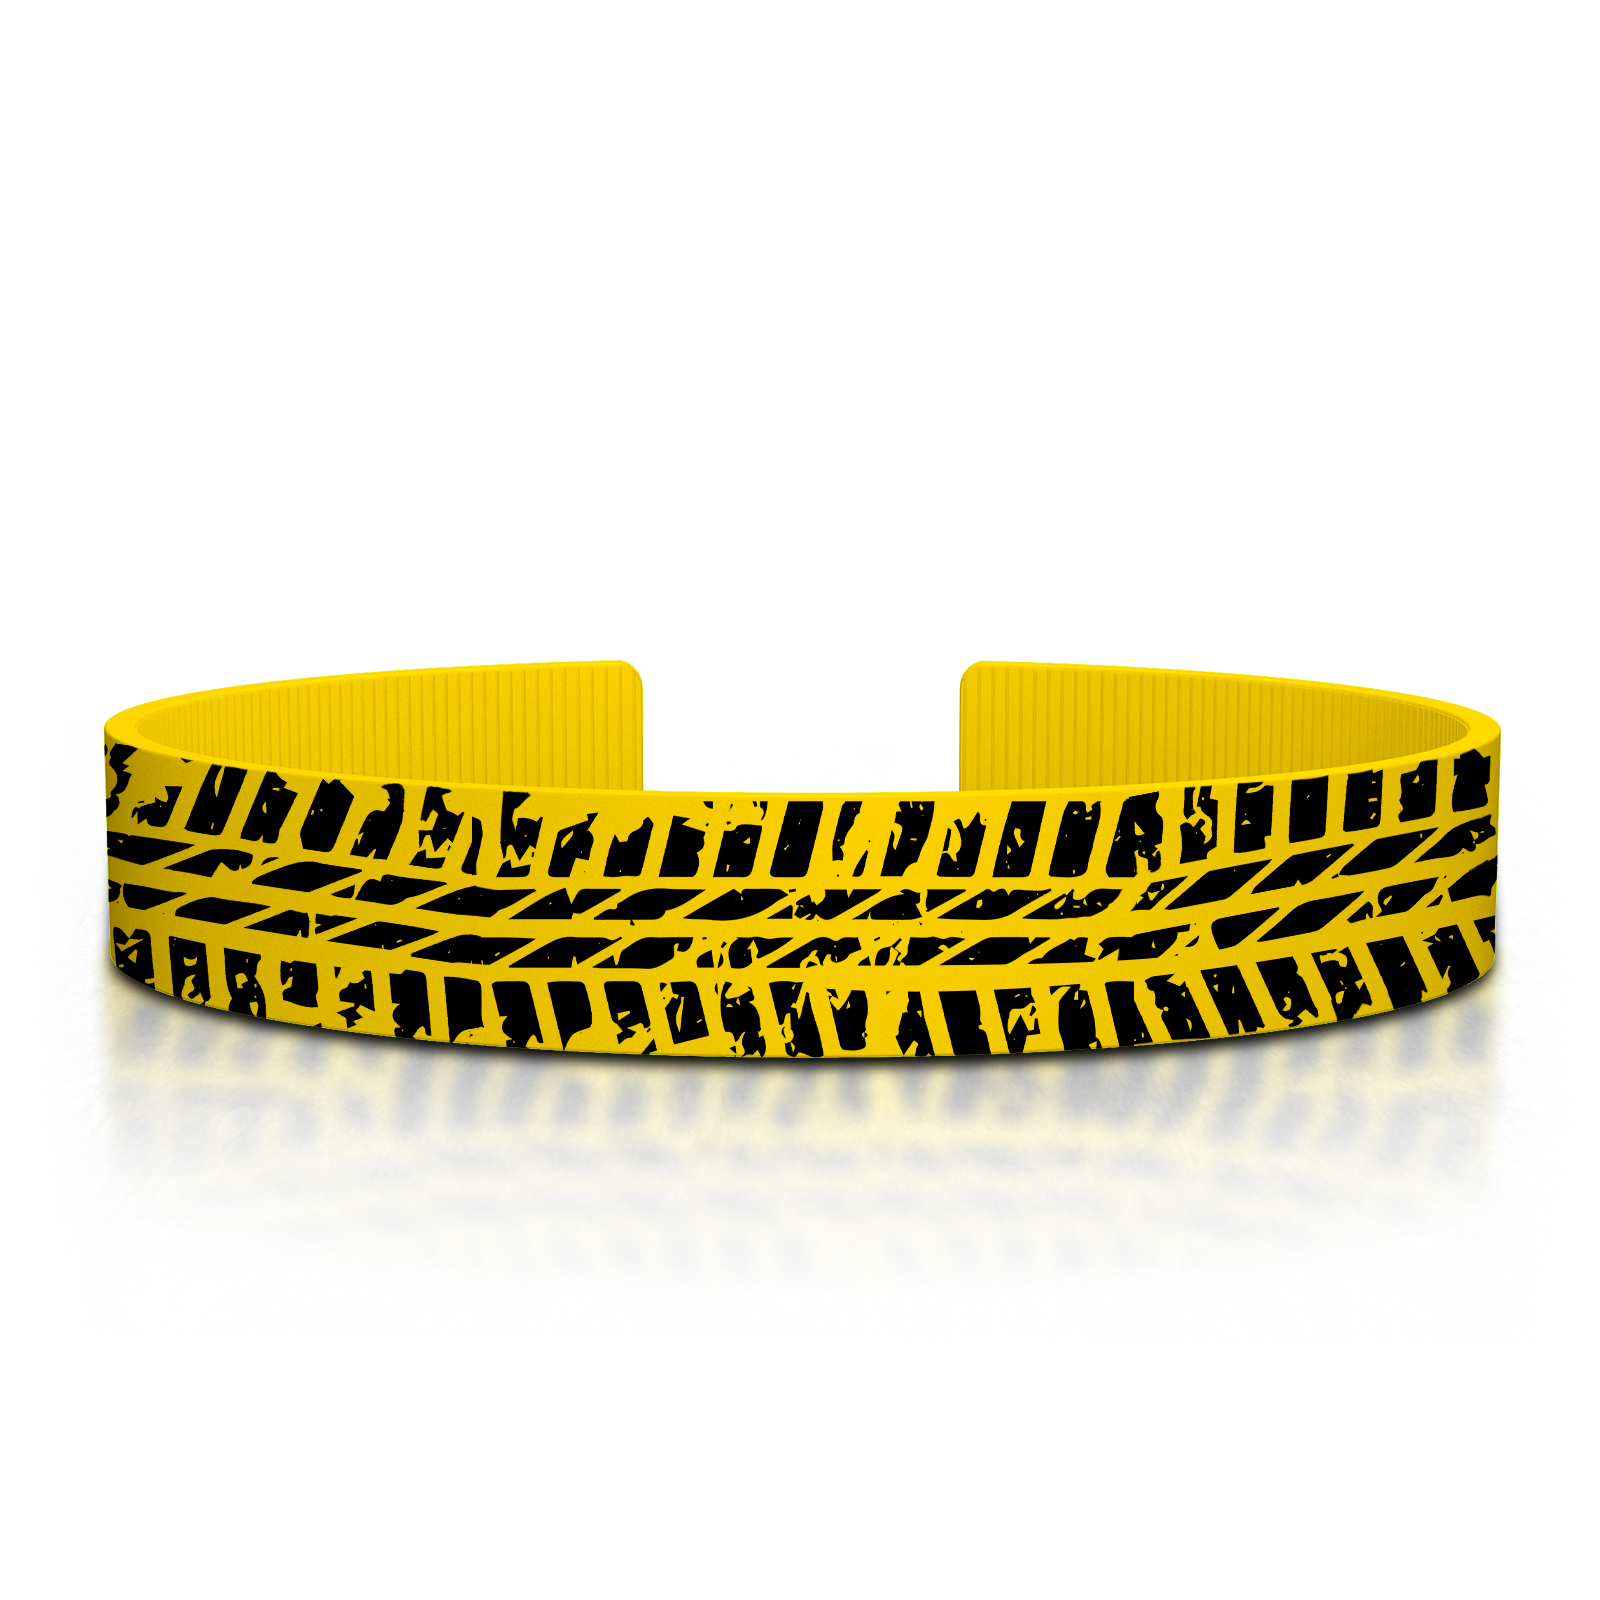 Clearance Elite Band 13mm Clearance Band One Size Fits All - ROAD iD